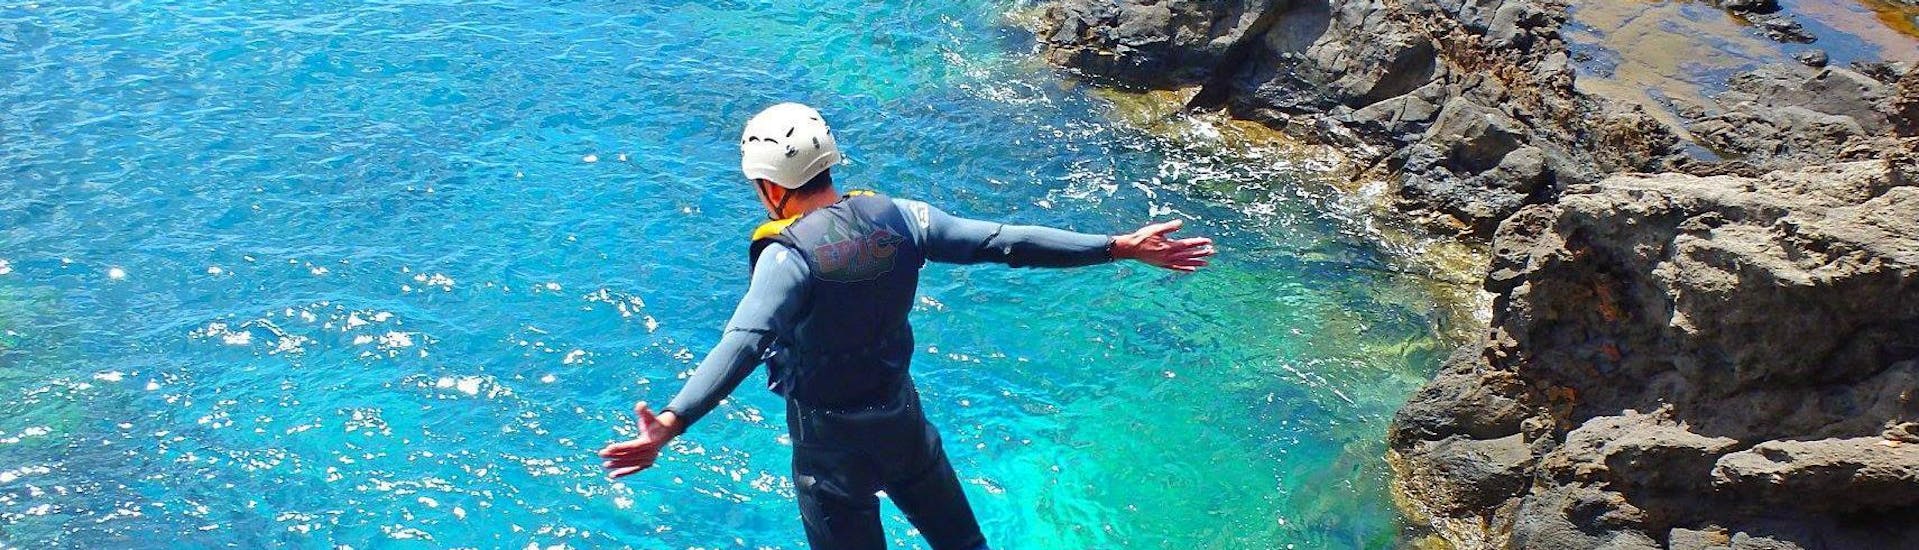 A participant of the Coasteering at Ponta de São Lourenço with Epic Madeira is jumping into the turquoise water of the ocean.